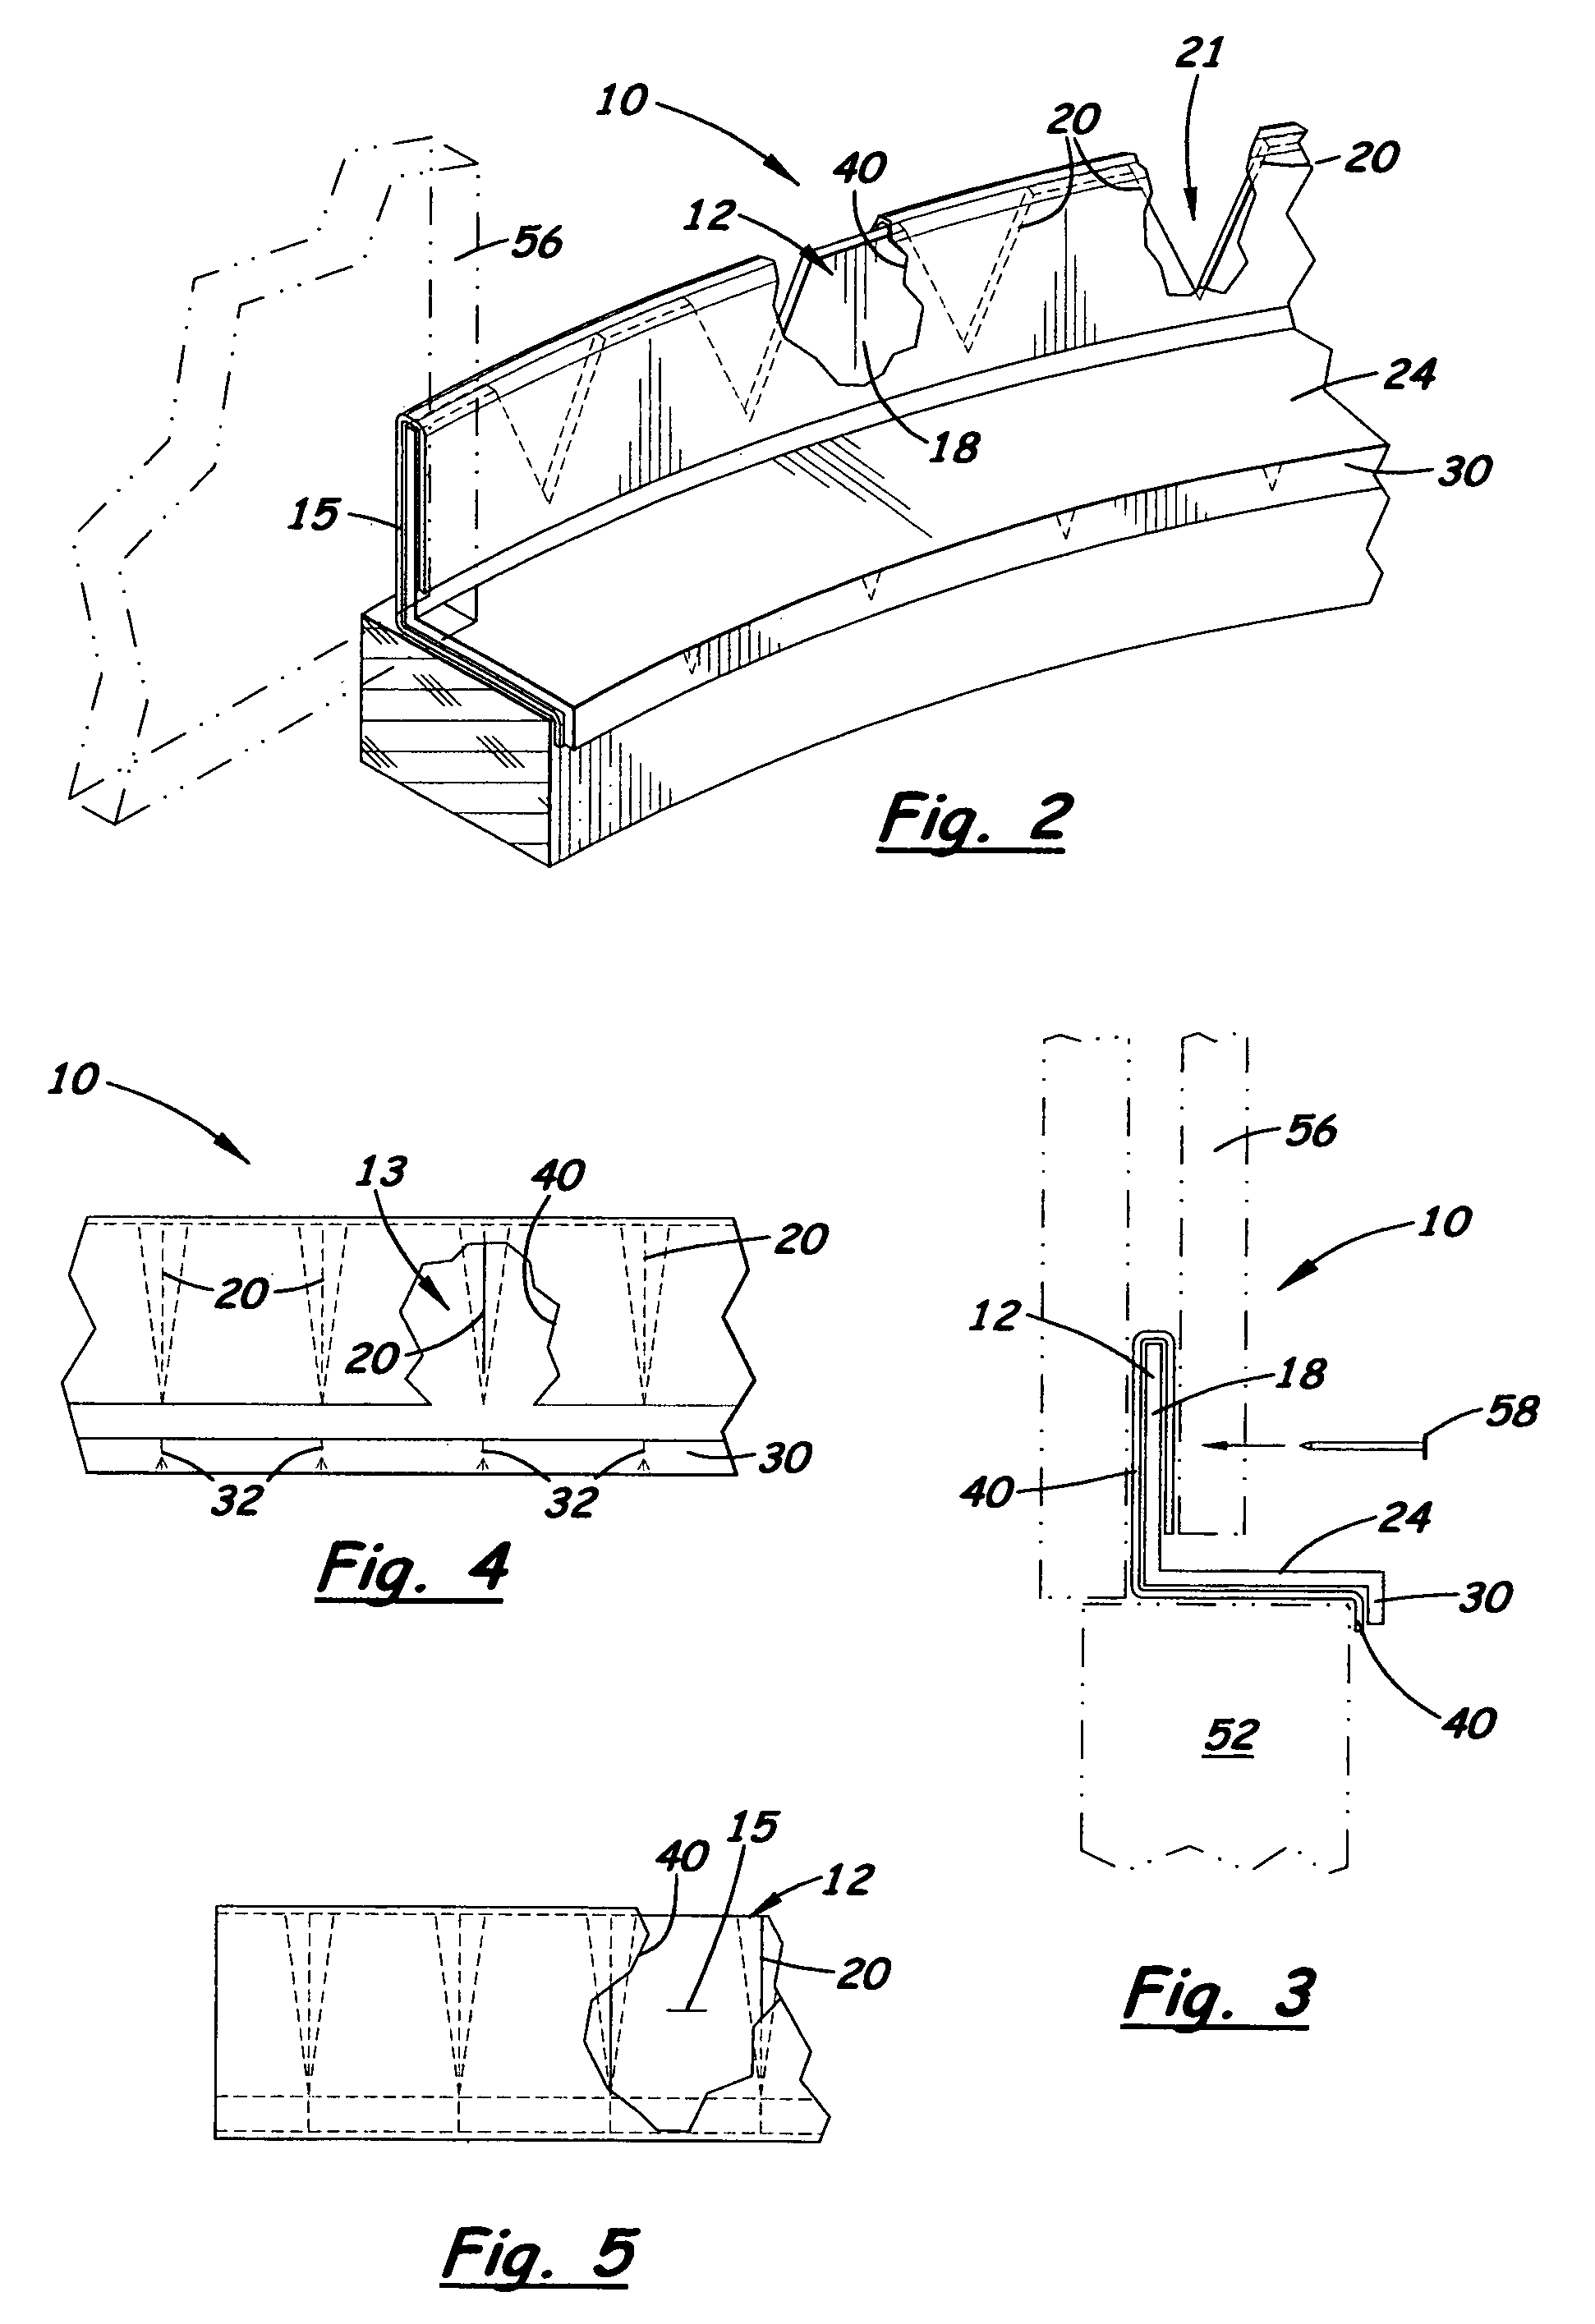 Flashing for an exterior arched surface and method